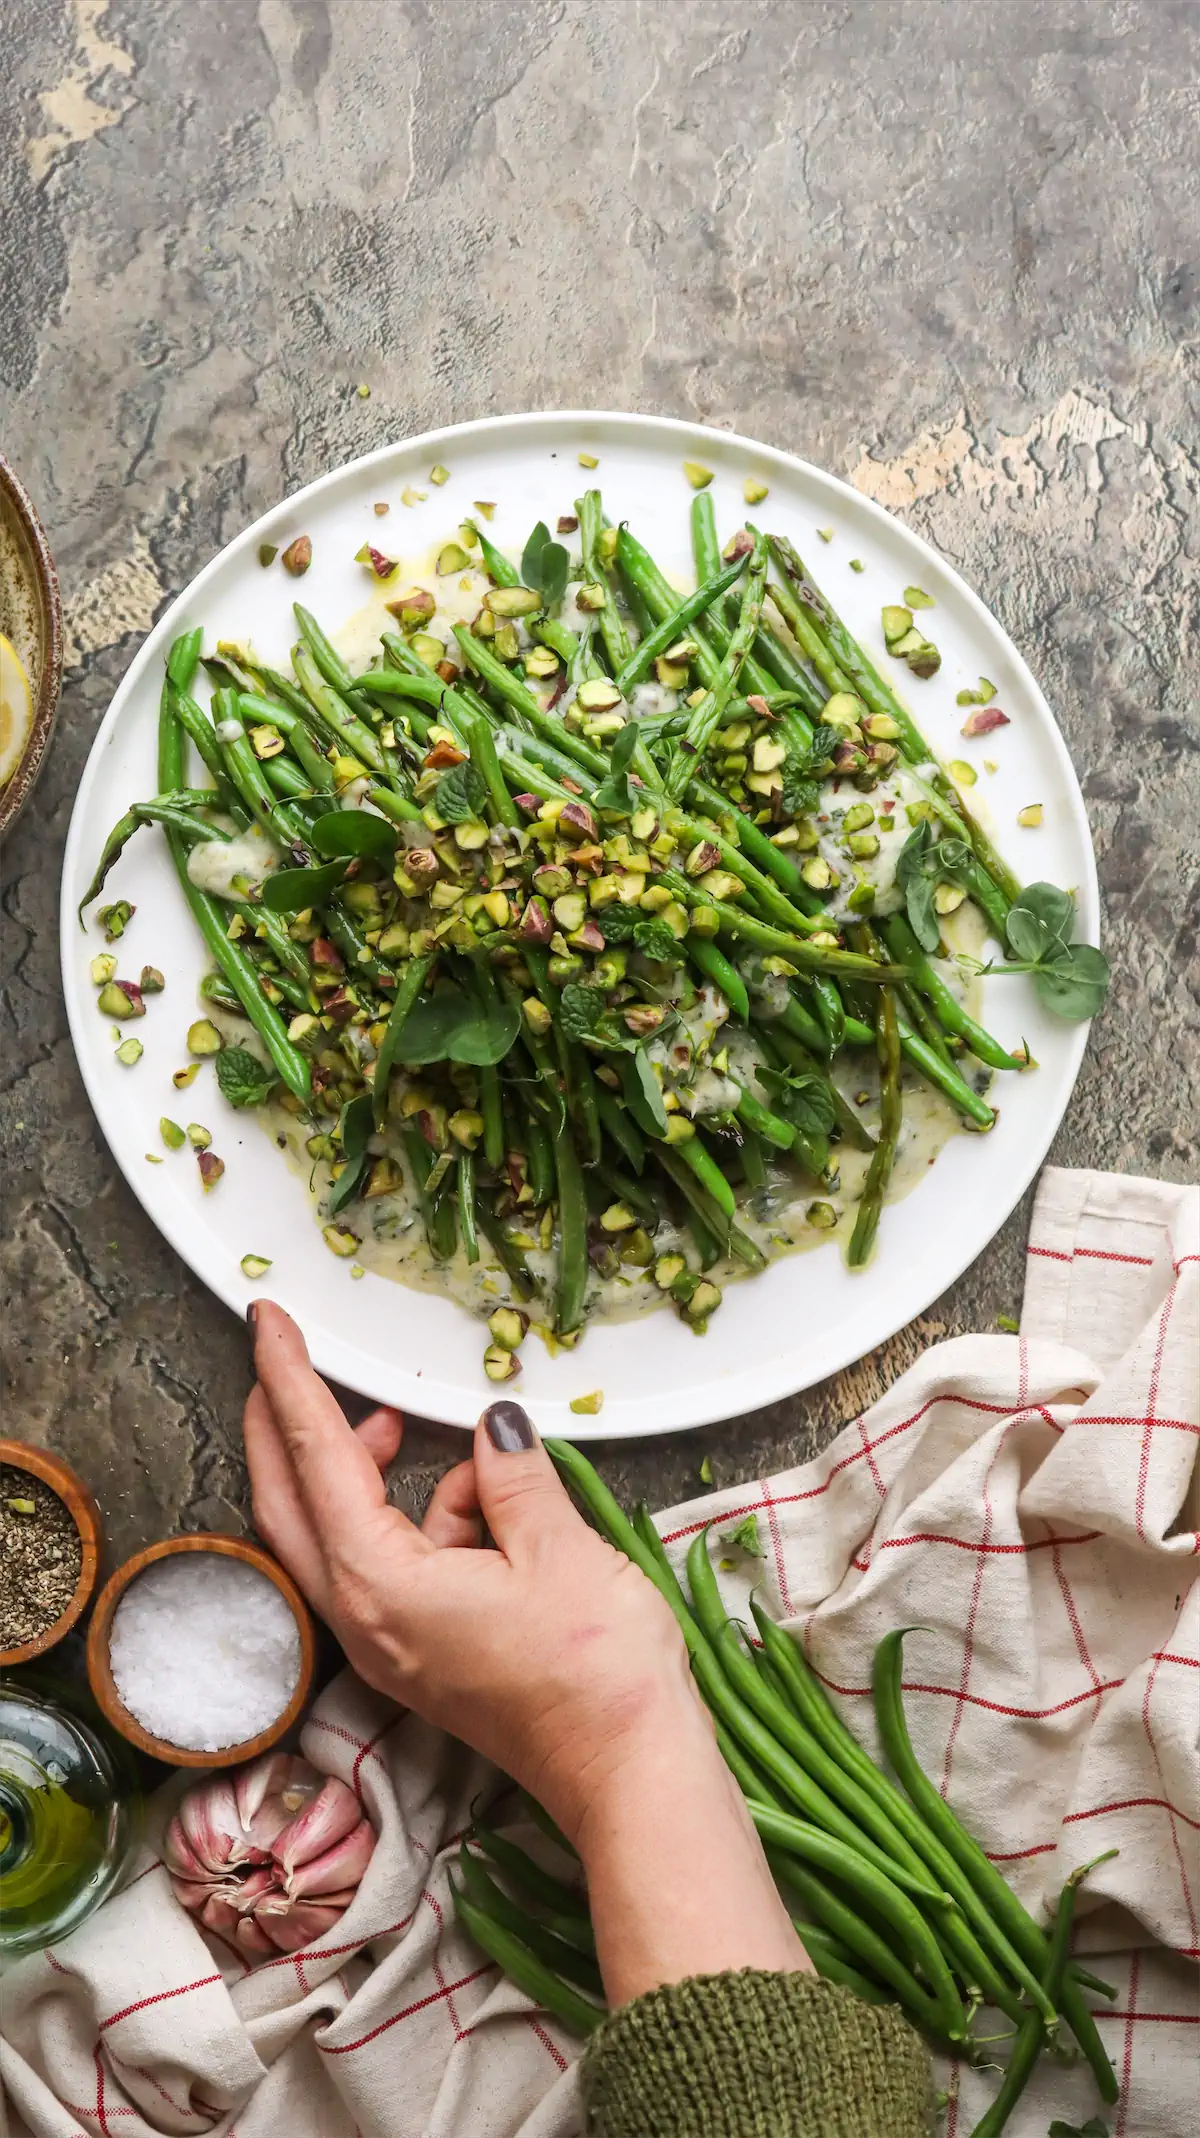 Grilled green bean salad, dressed with yogurt and mint, garnished with pistachios on a plate.